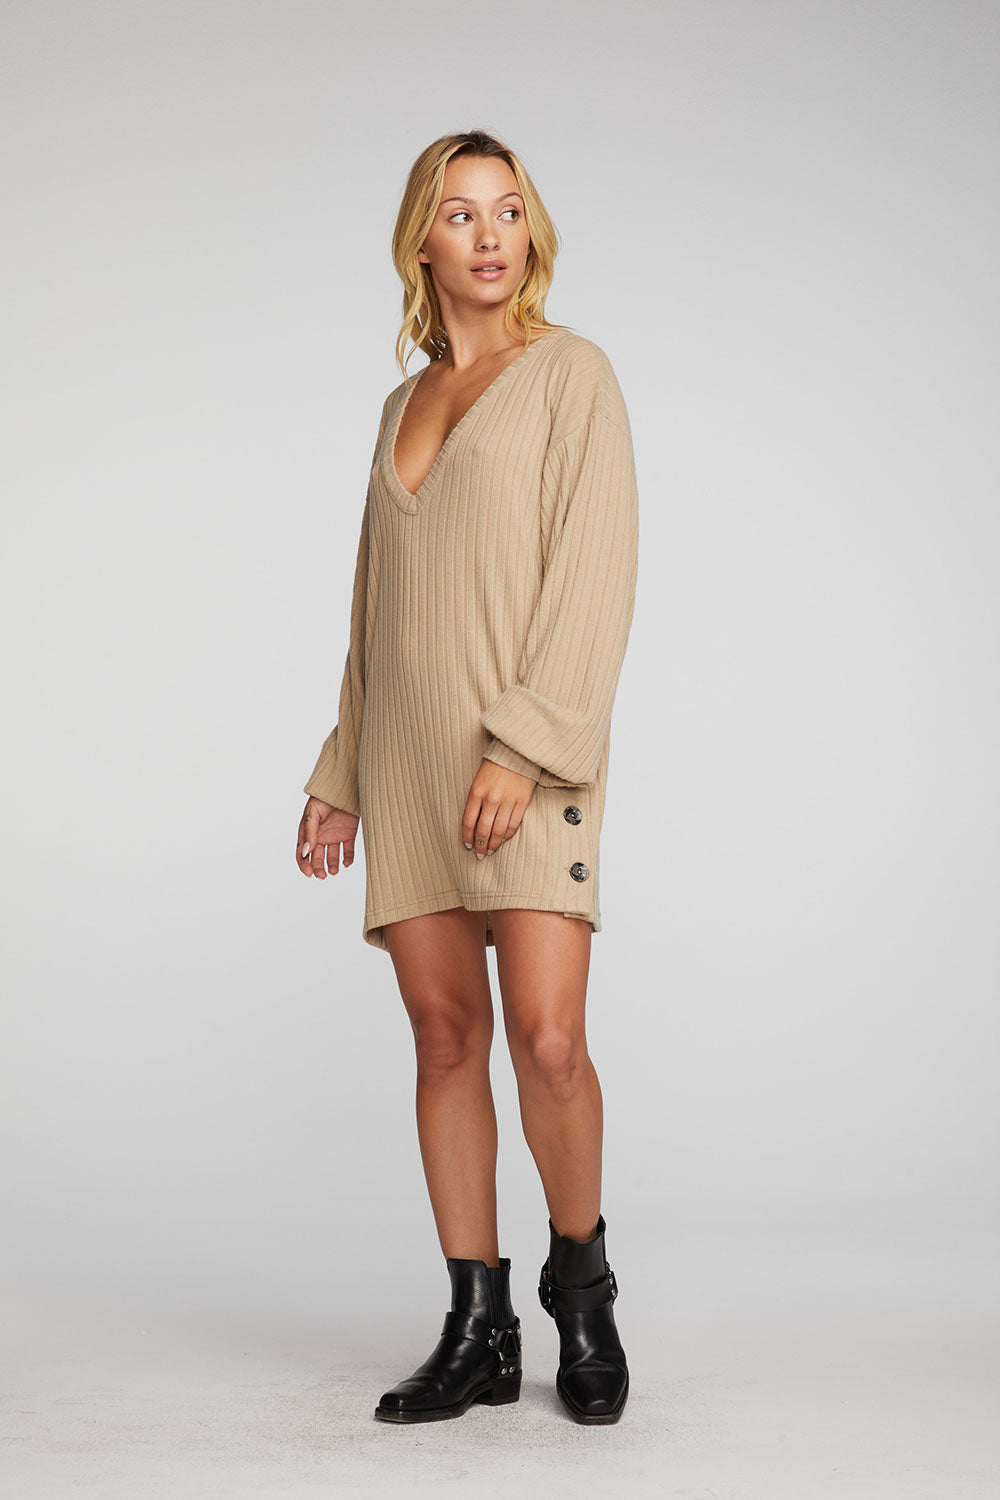 Poor Boy Rib V-neck Tunic with Button Side Seam Womens chaserbrand